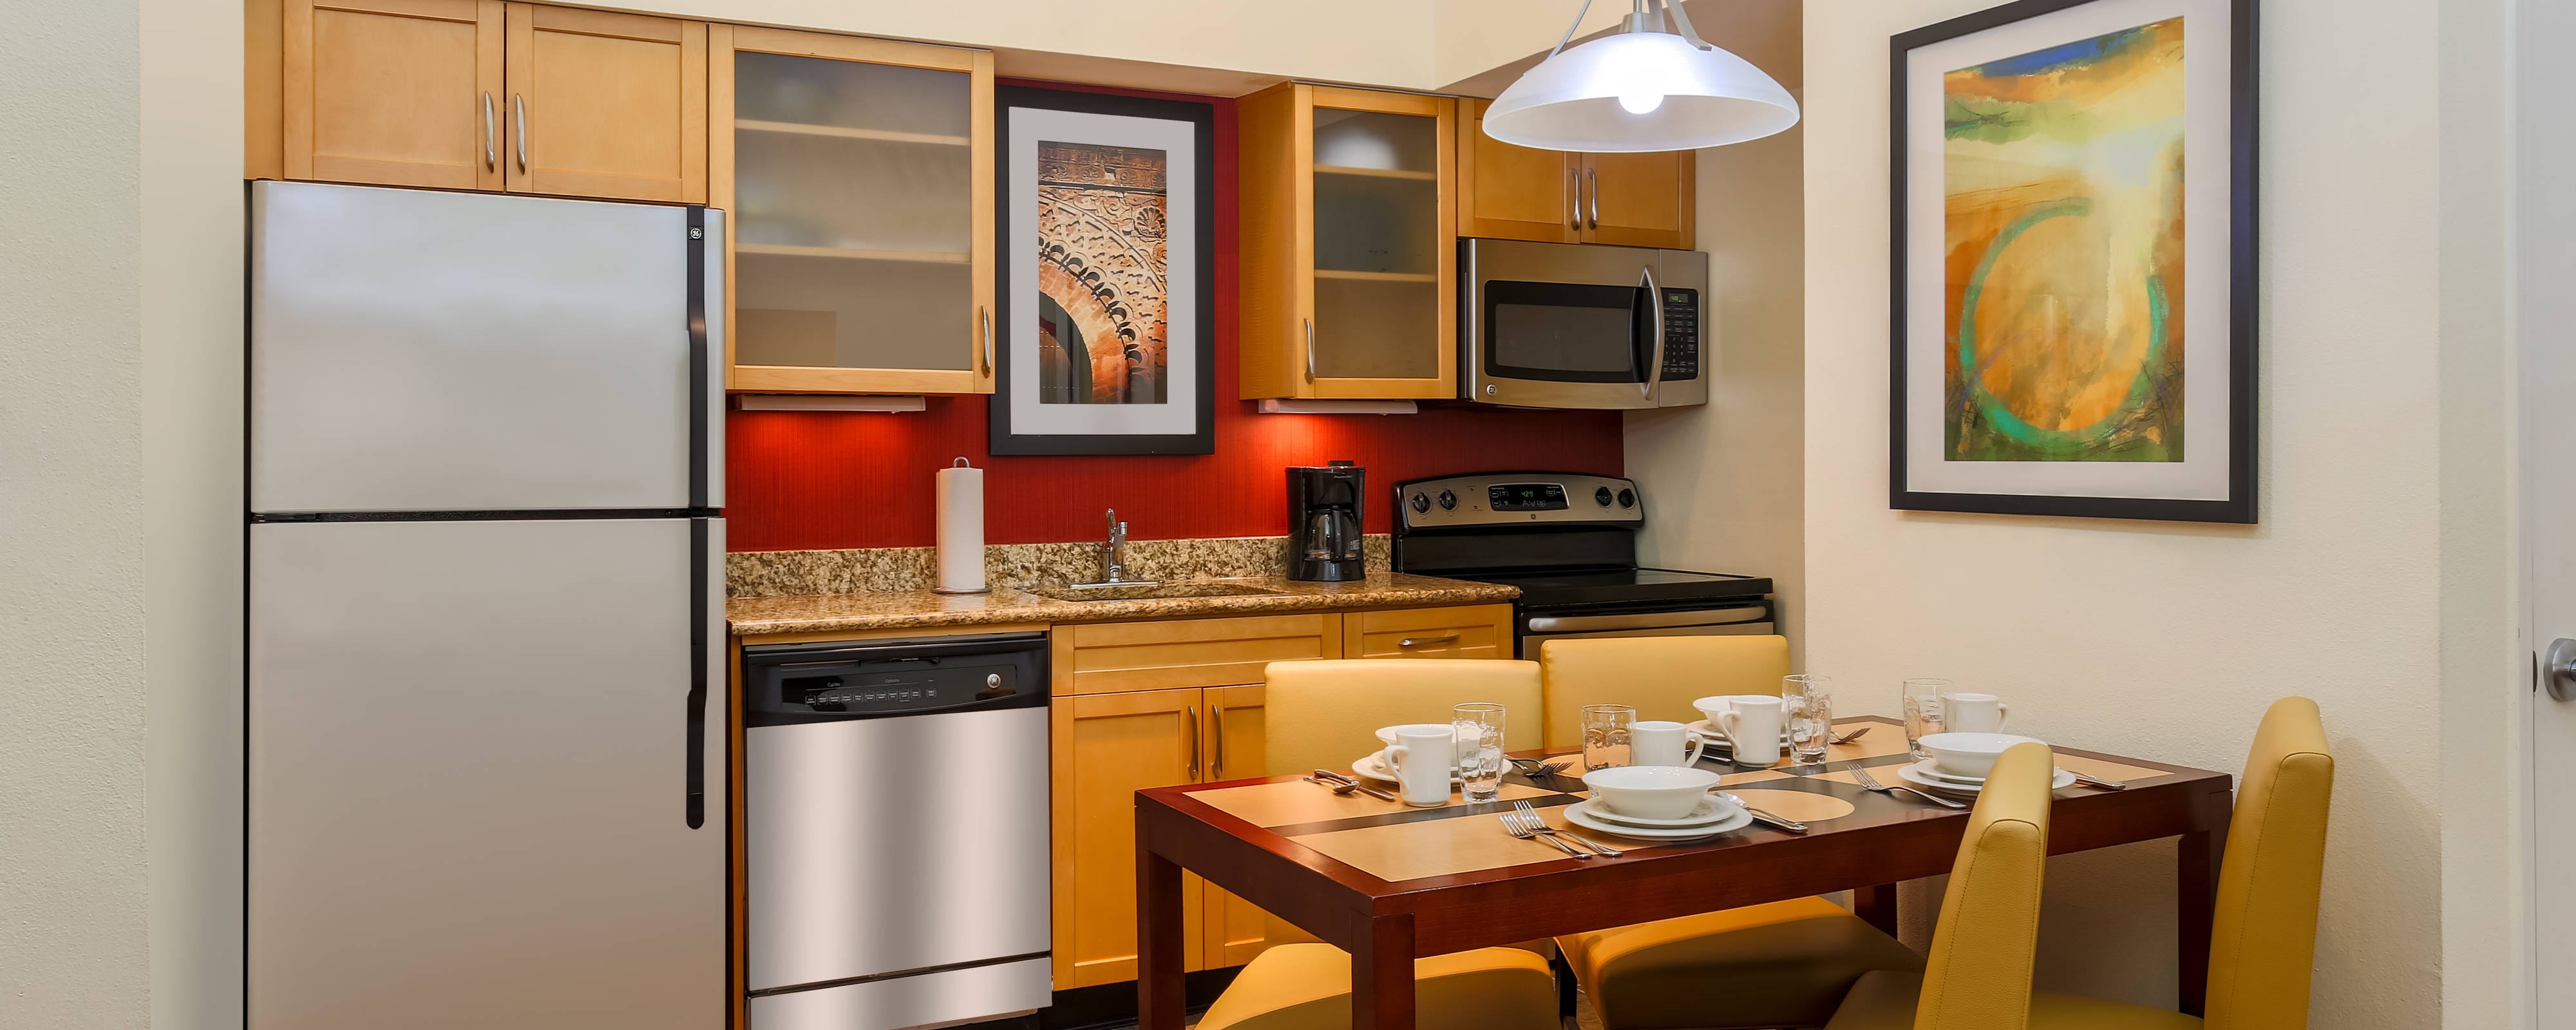 Hotels near St Louis Galleria | Extended Stay Hotel in Clayton MO